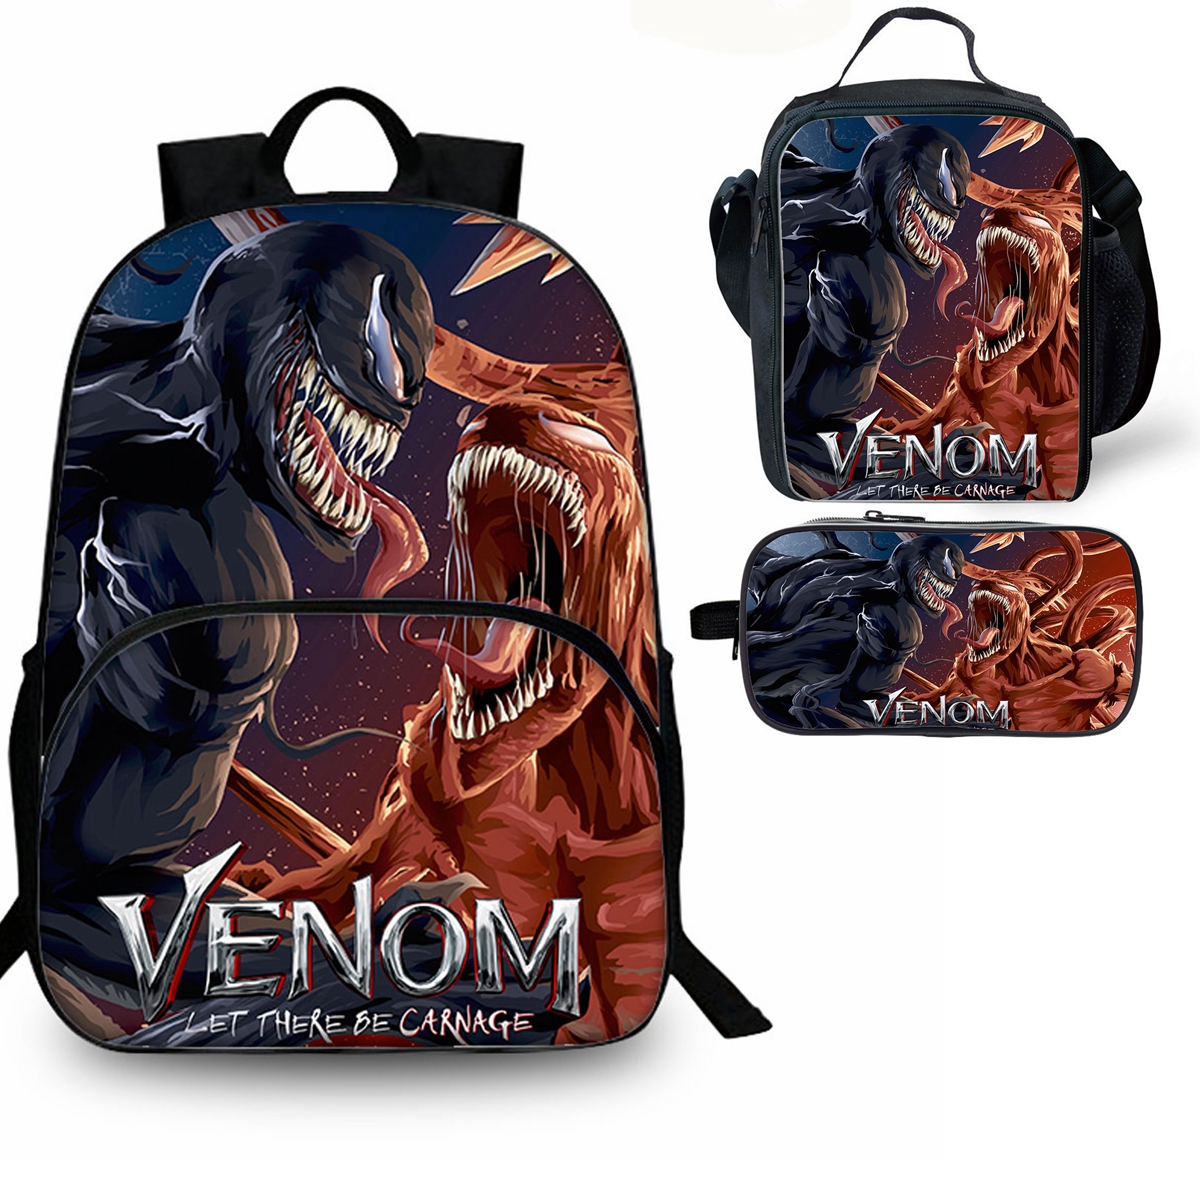 Venom 15 inches School Backpack Lunch Bag Pencil Case 3 Pieces Combo